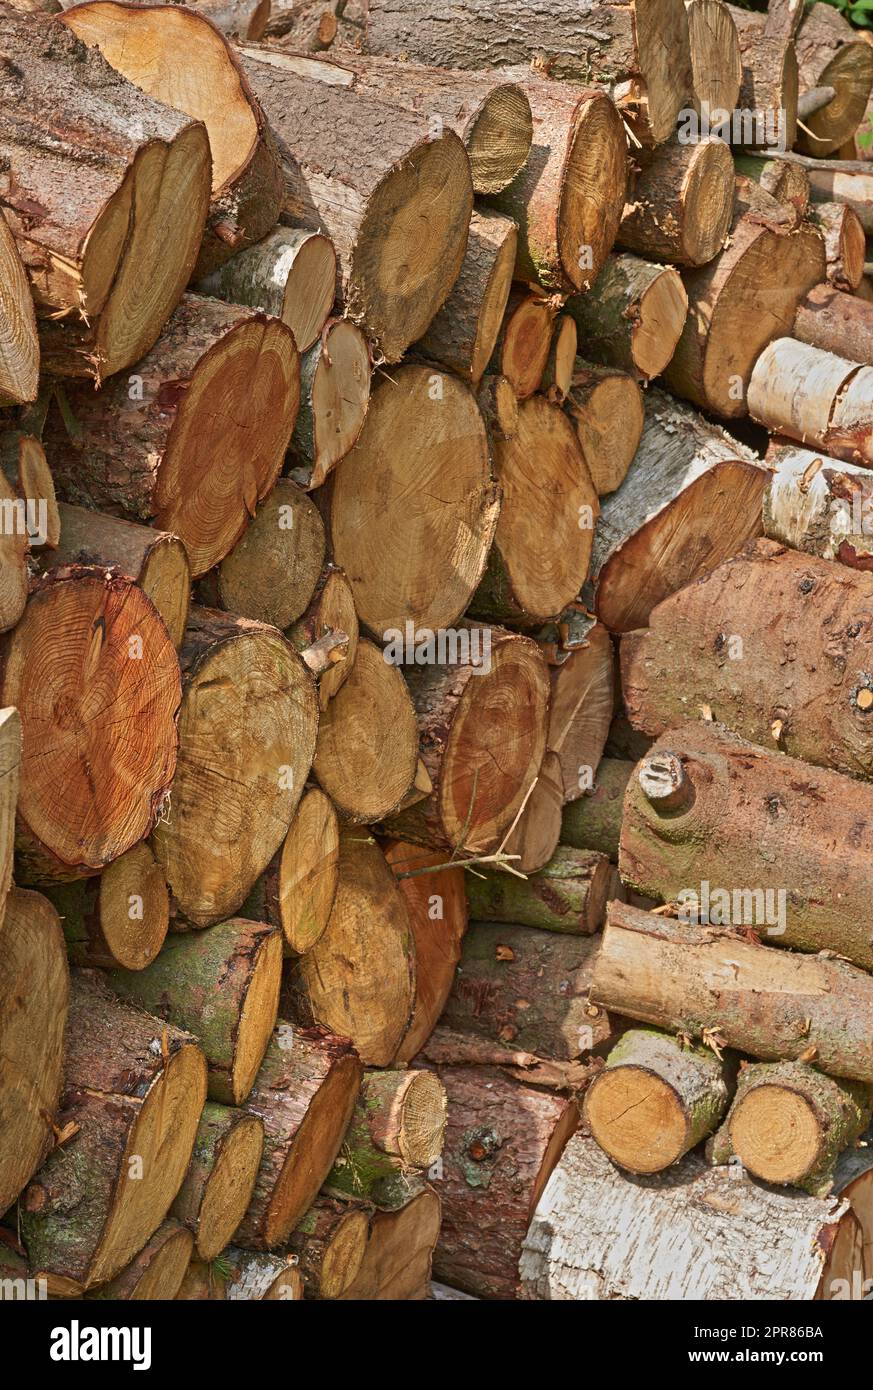 Preparation of firewood for the winter. Stacks of firewood in the forest. Firewood background. Sawed and chopped trees. Stacked wooden logs.. Firewood. Stock Photo